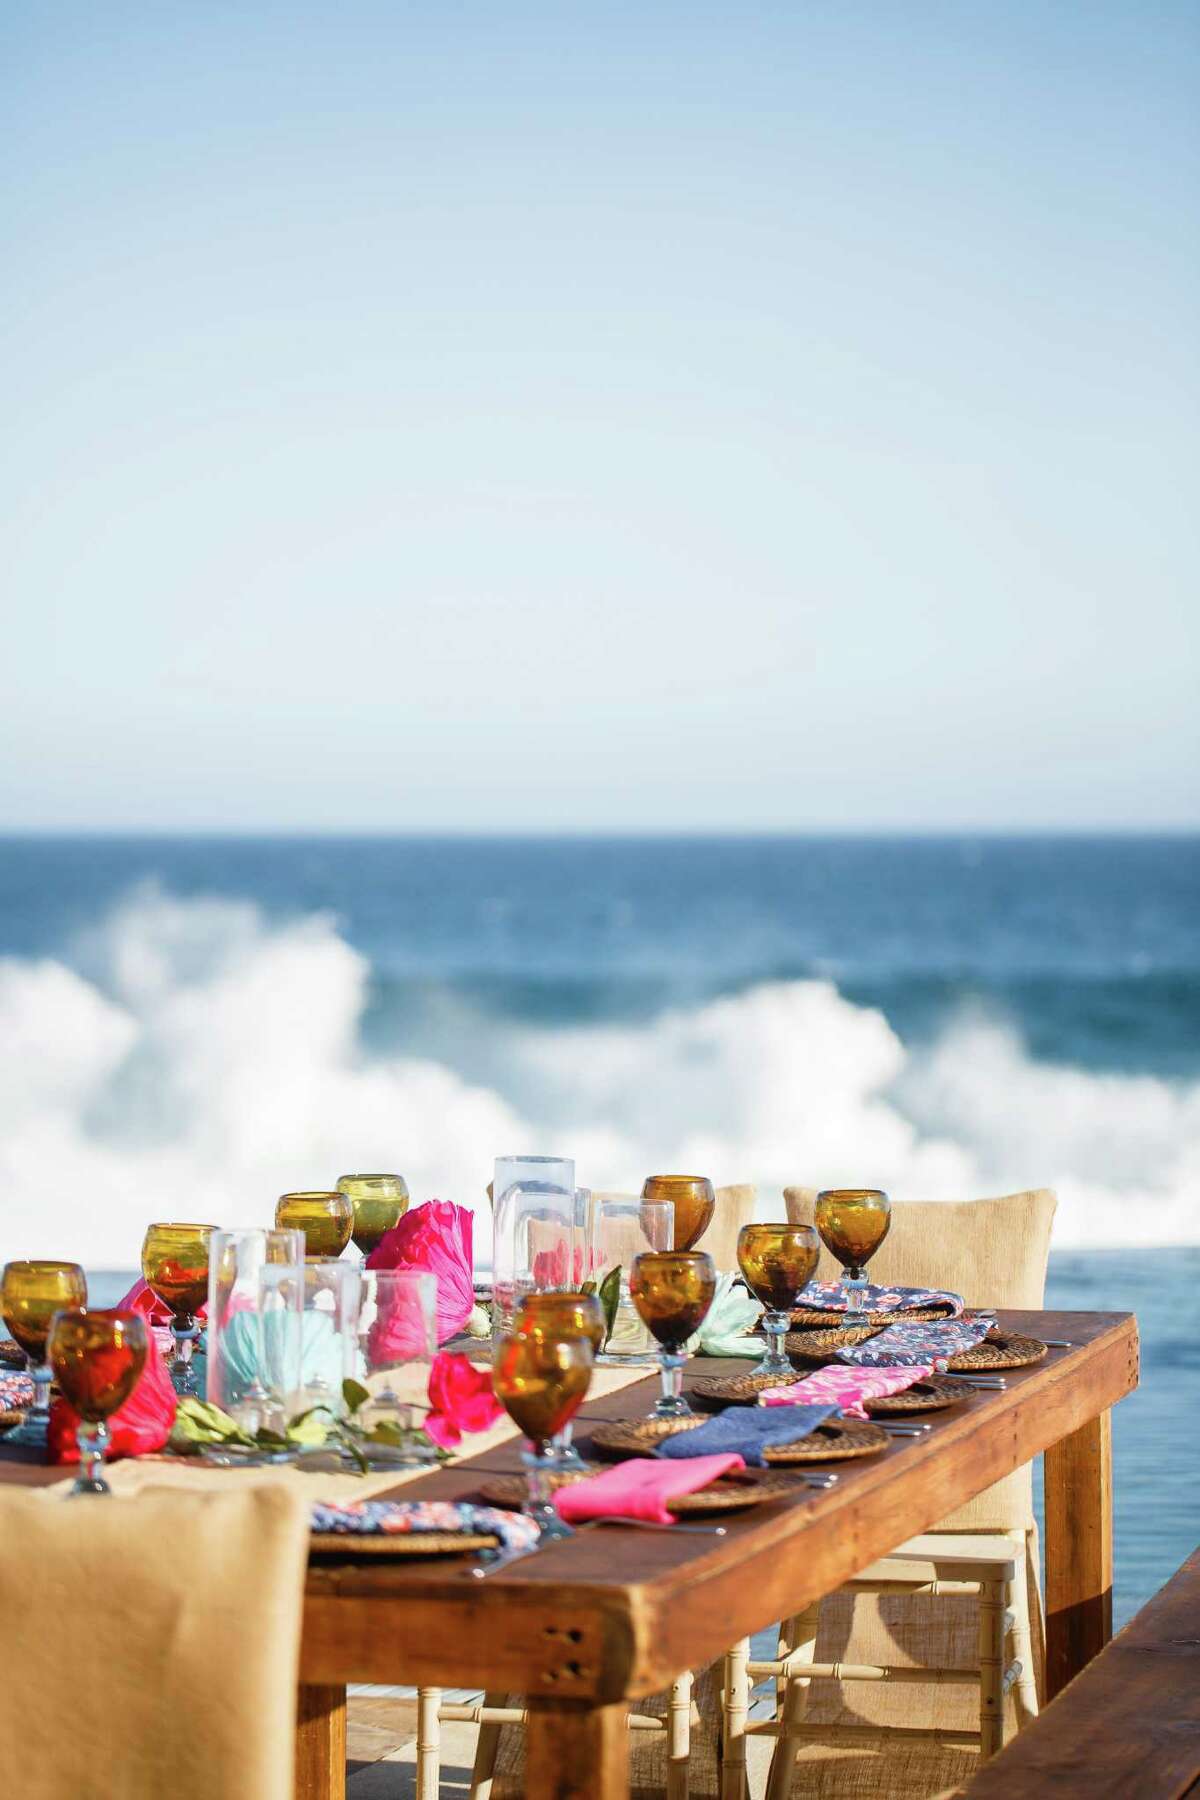 The second annual Capella Pedregal Food & Wine Festival included a barbecue on the beach with beautifully set tables.